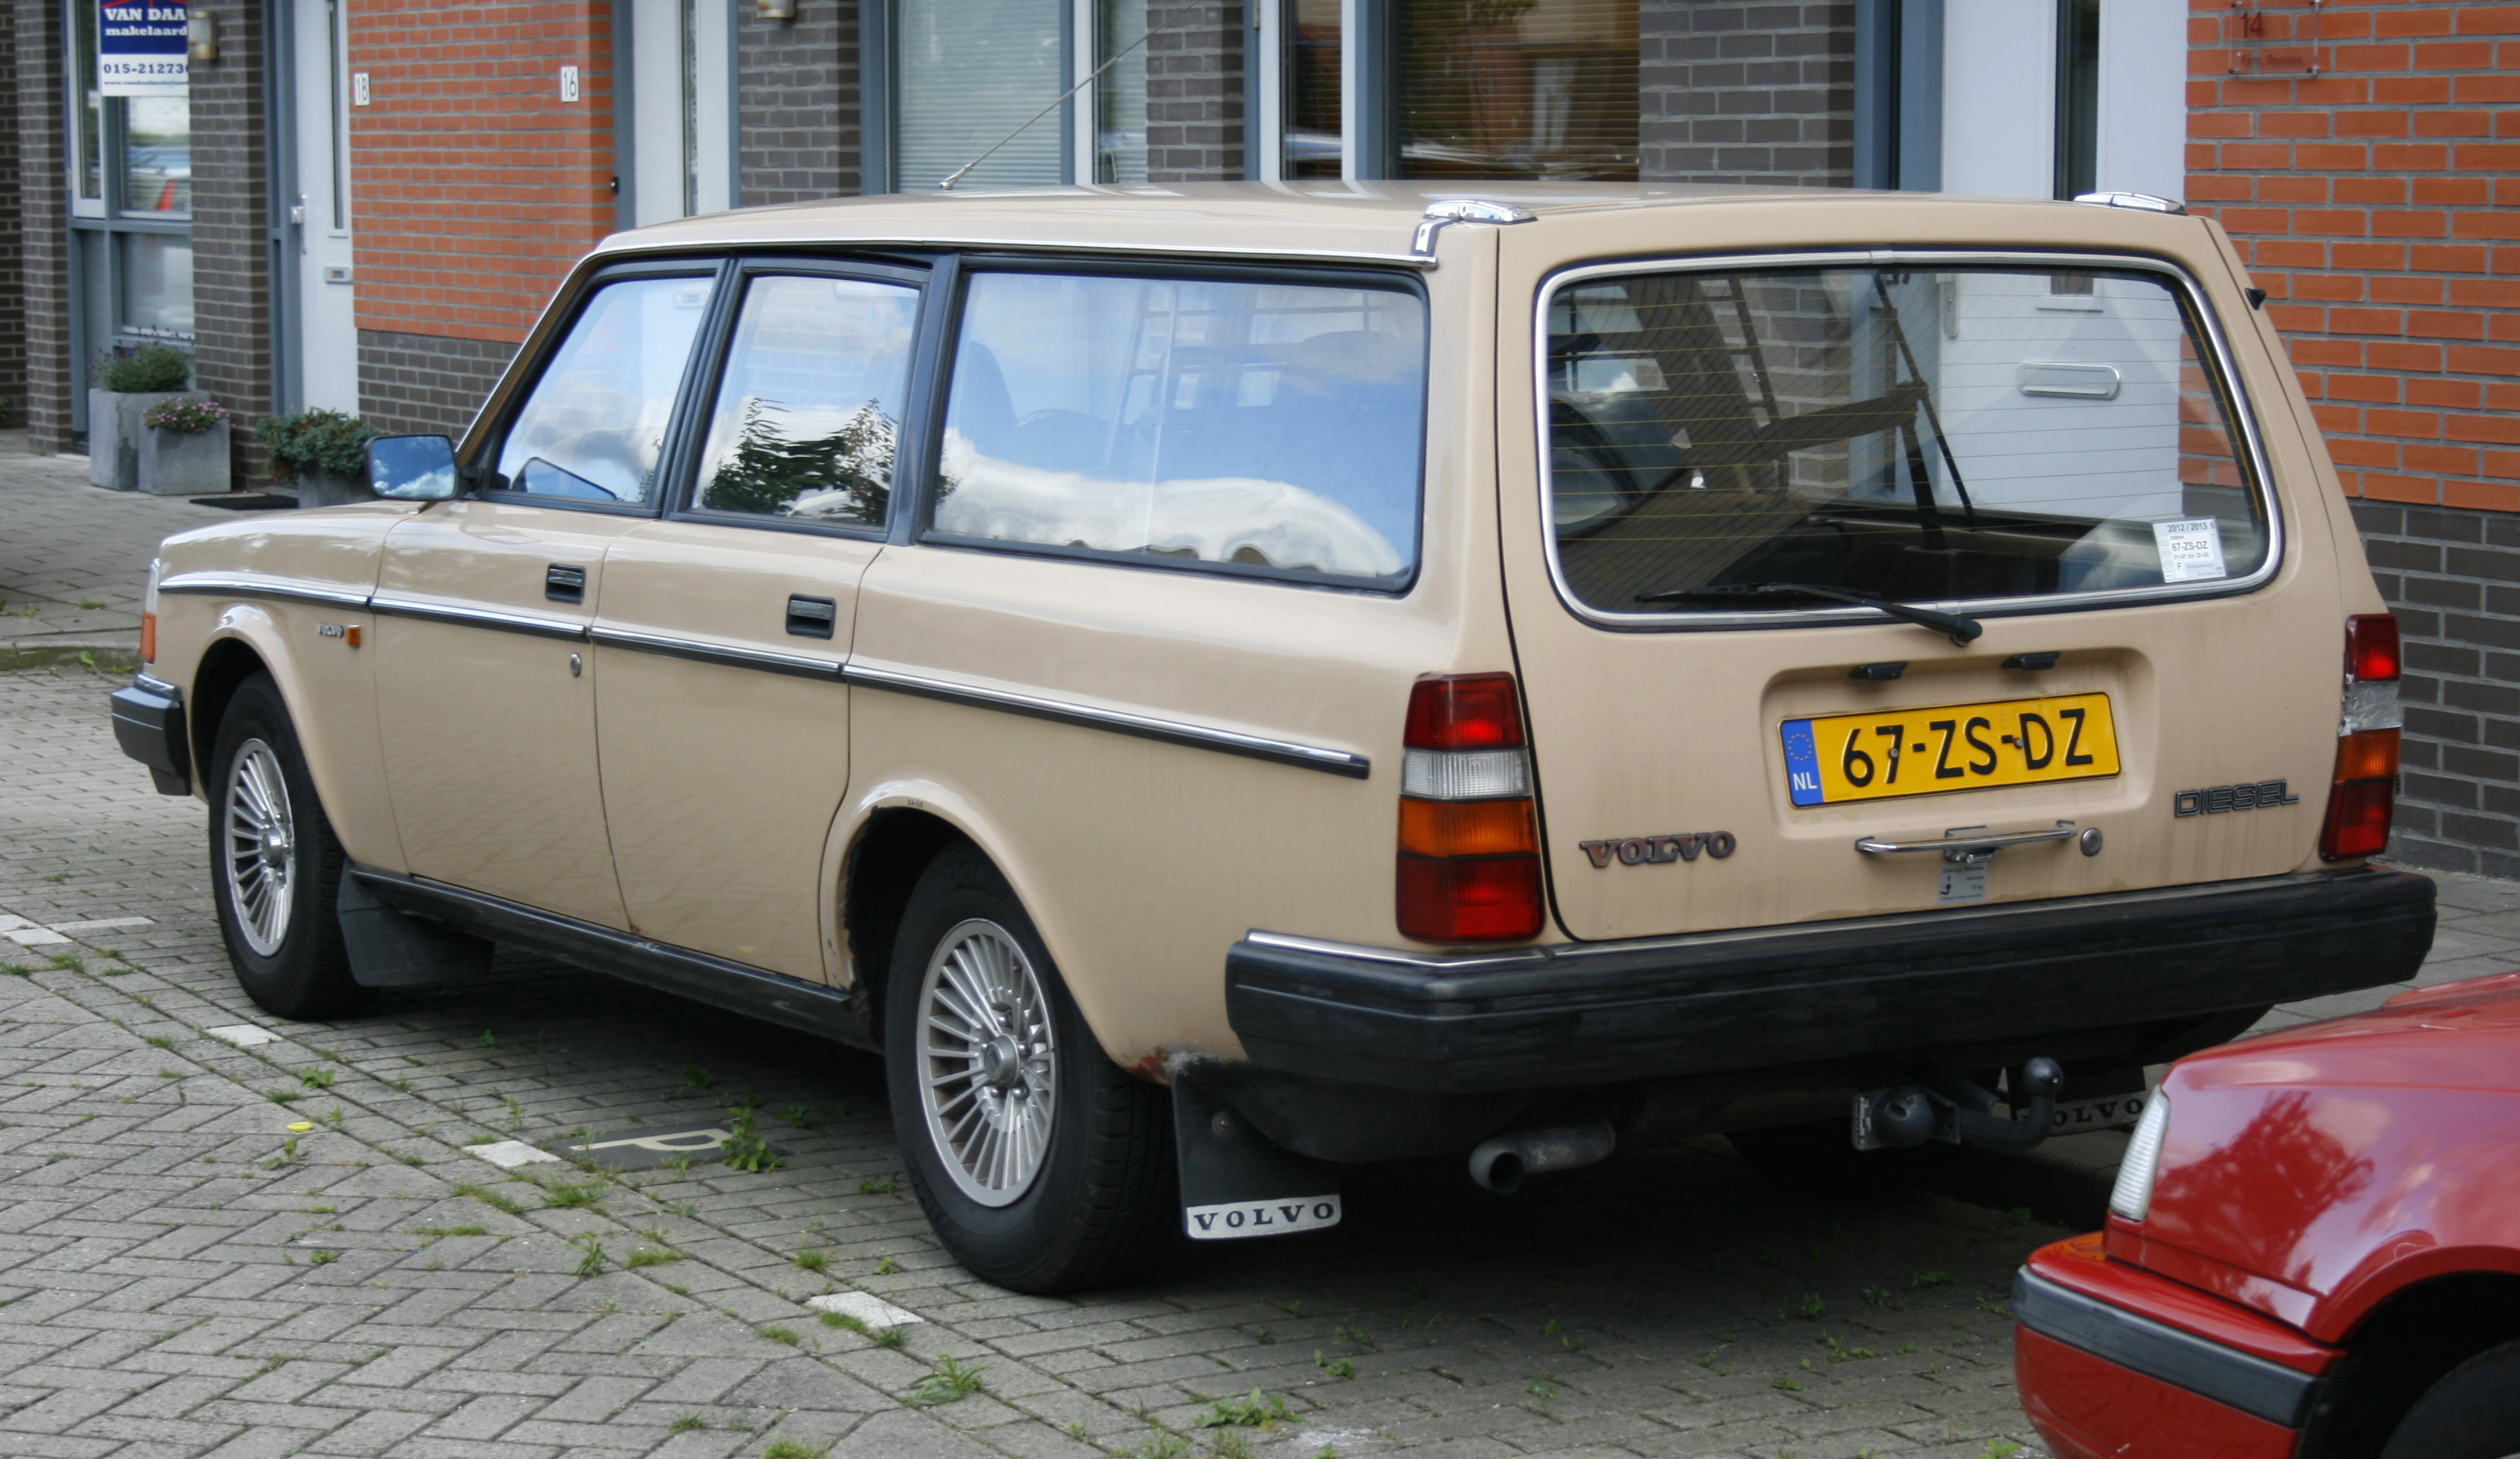 Volvo 245 GL 'Overdrive' | Flickr - Photo Sharing!